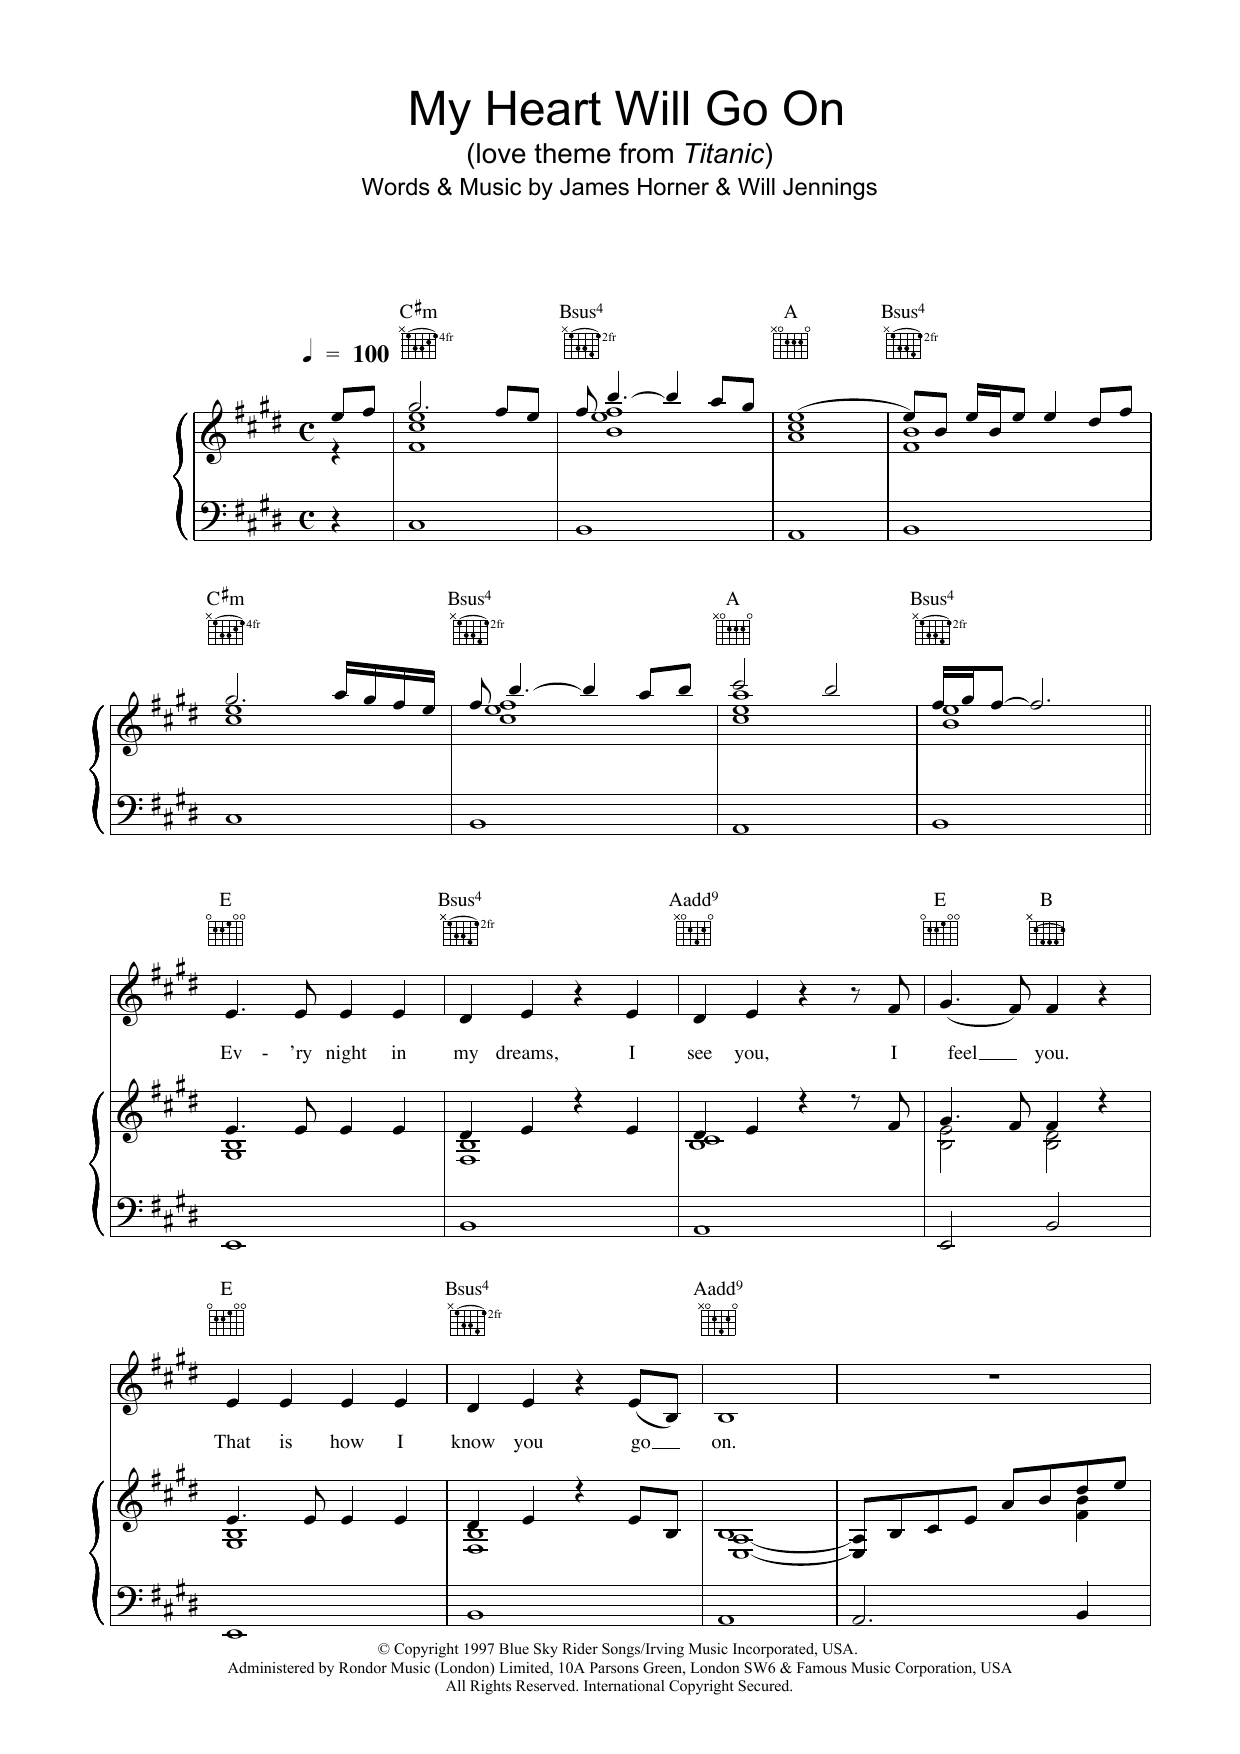 My Heart Will Go On (Love Theme from Titanic) sheet music